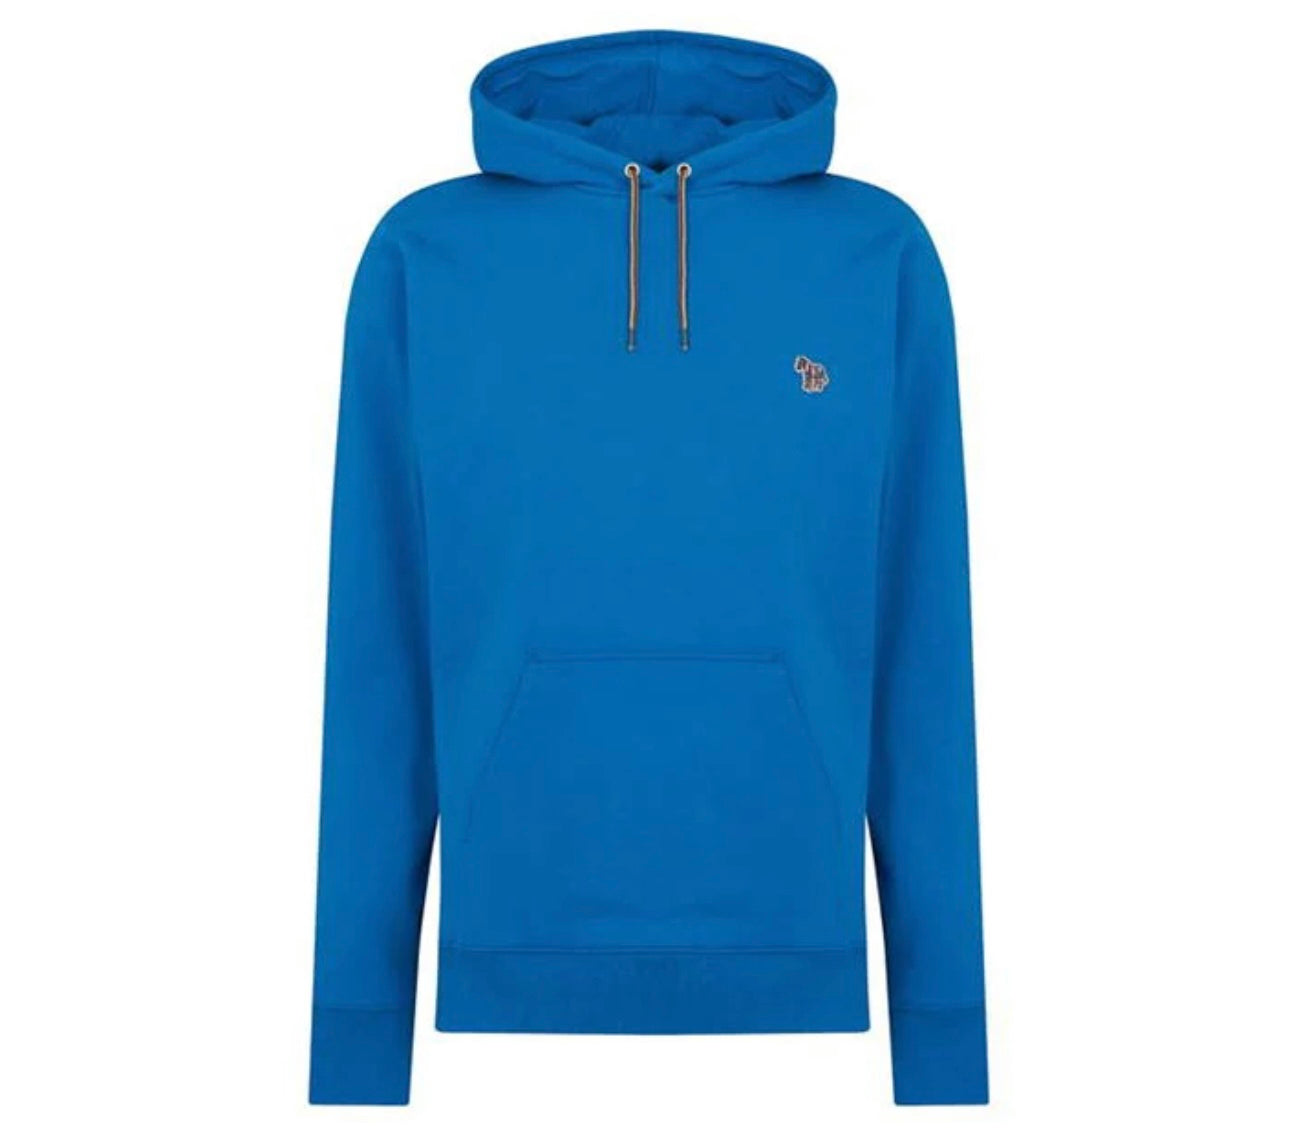 PAUL SMITH EMBROIDERED ZEBRA OTTH HOODIE ROYAL BLUE